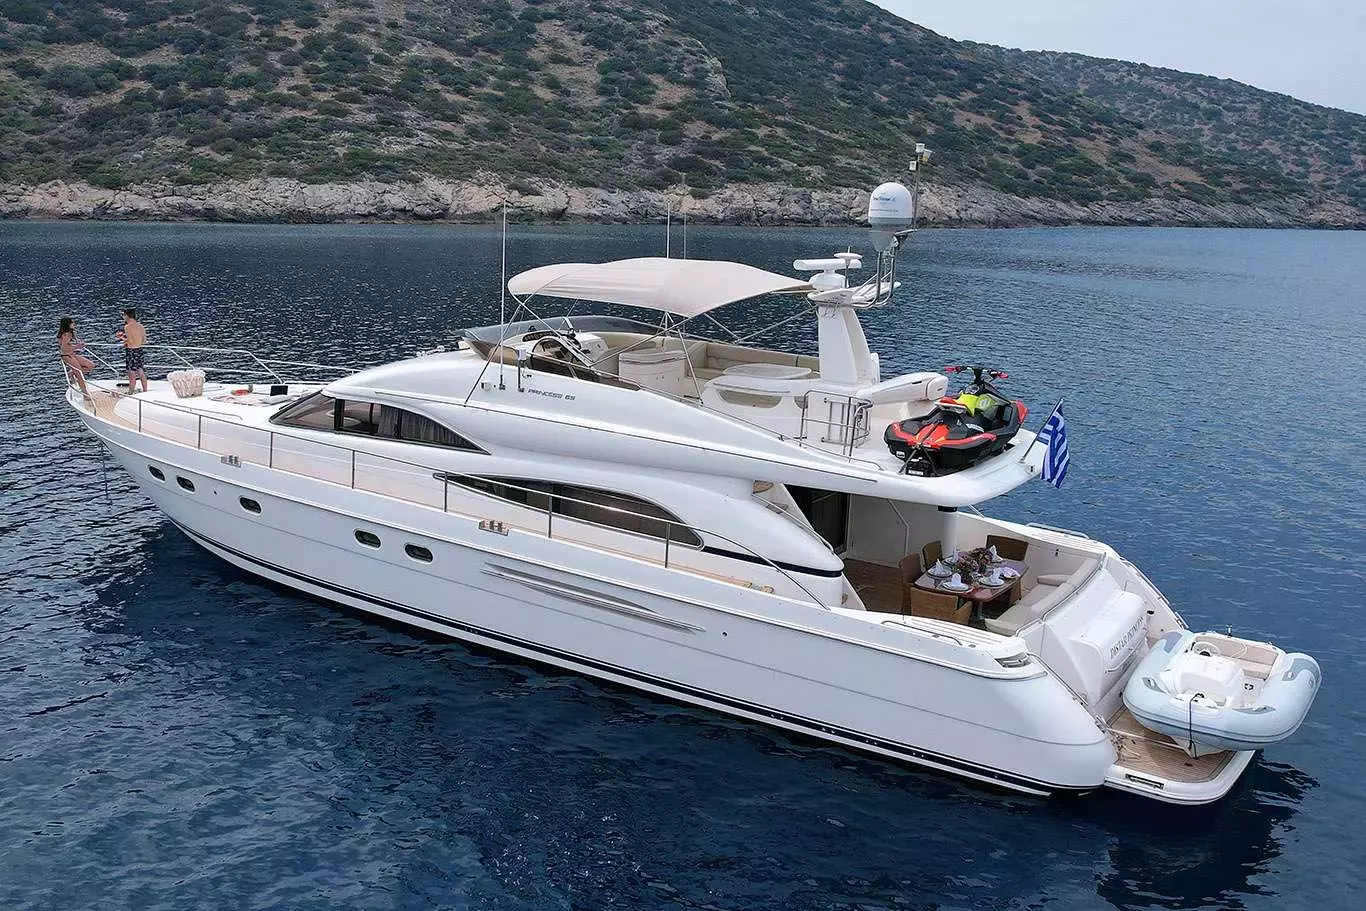 Distar Princess by Princess - Top rates for a Charter of a private Motor Yacht in Greece